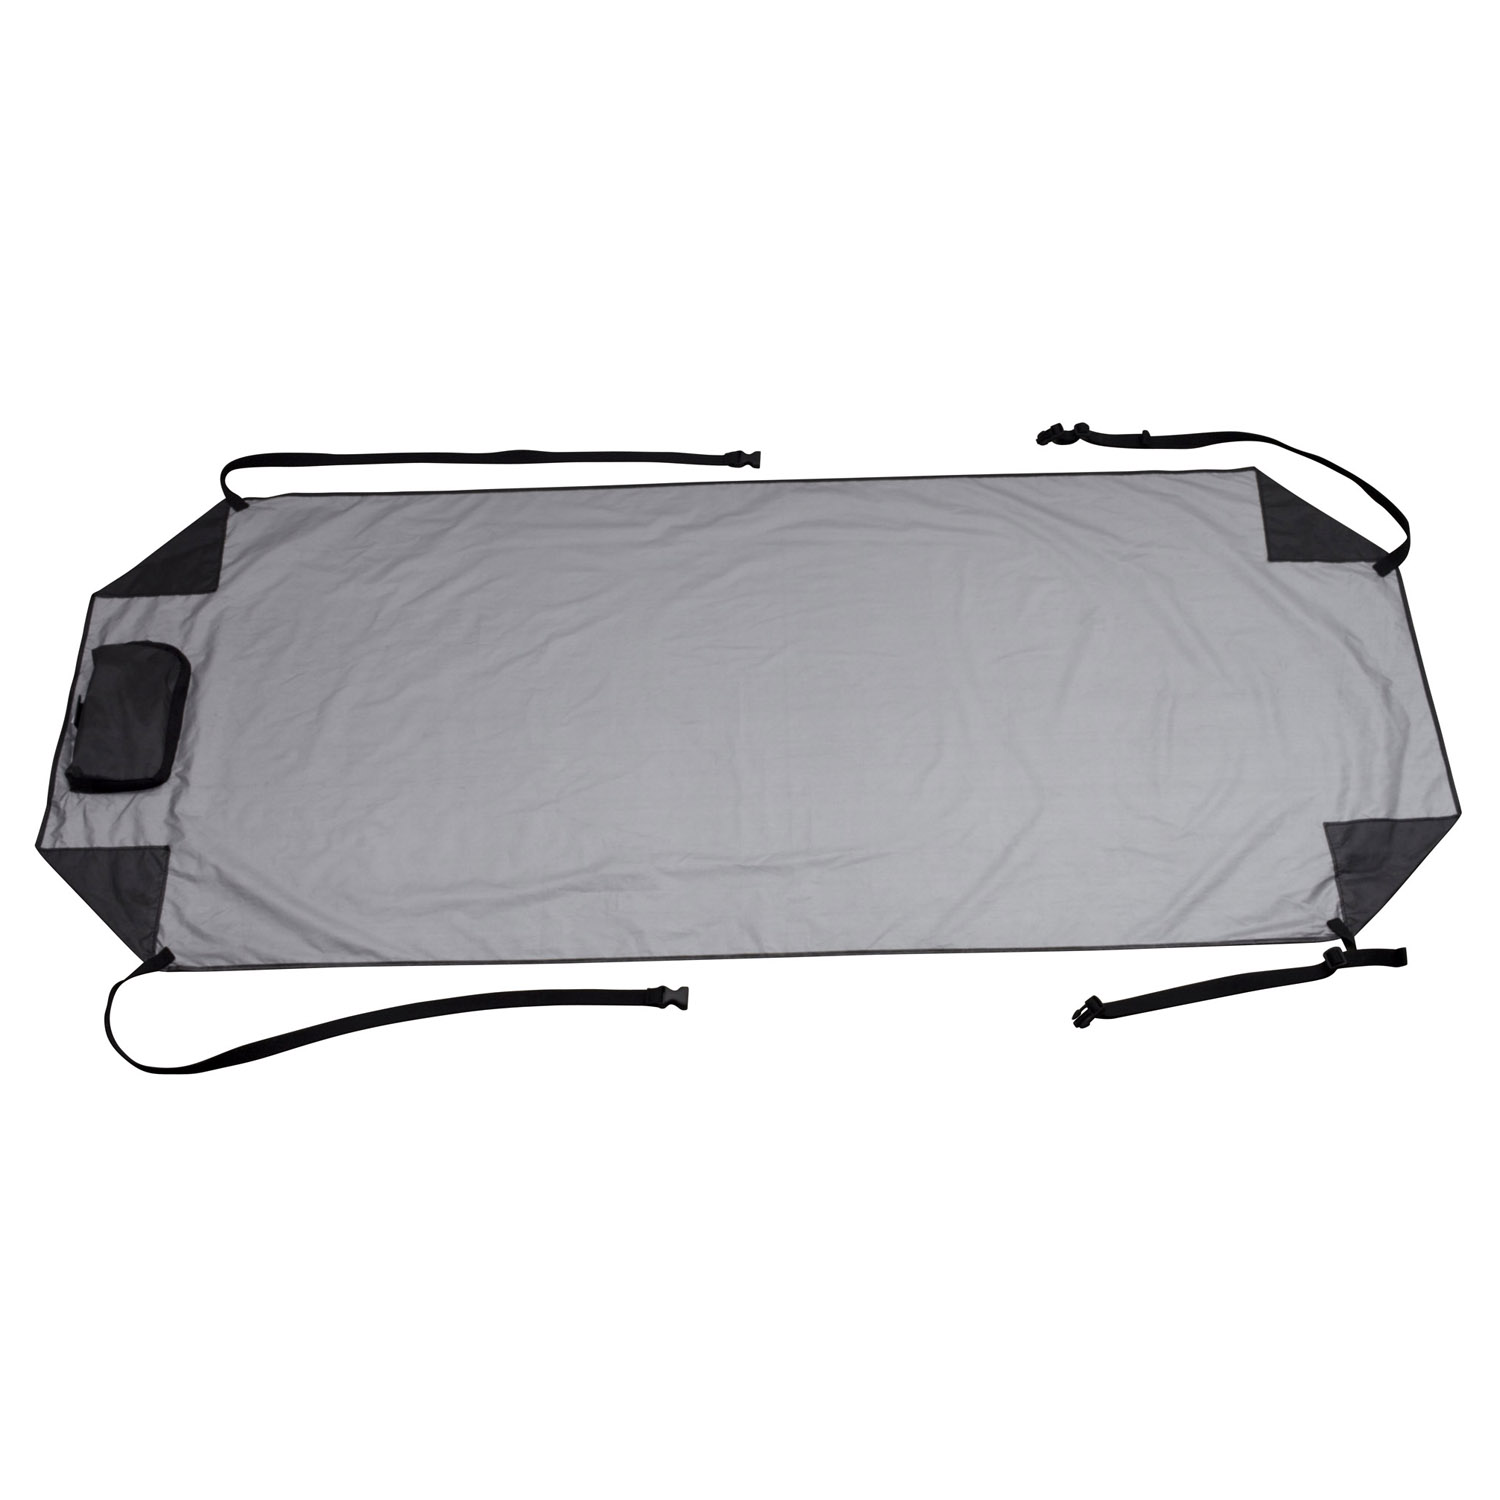 Classic Accessories Auto Windshield Cover - image 4 of 8